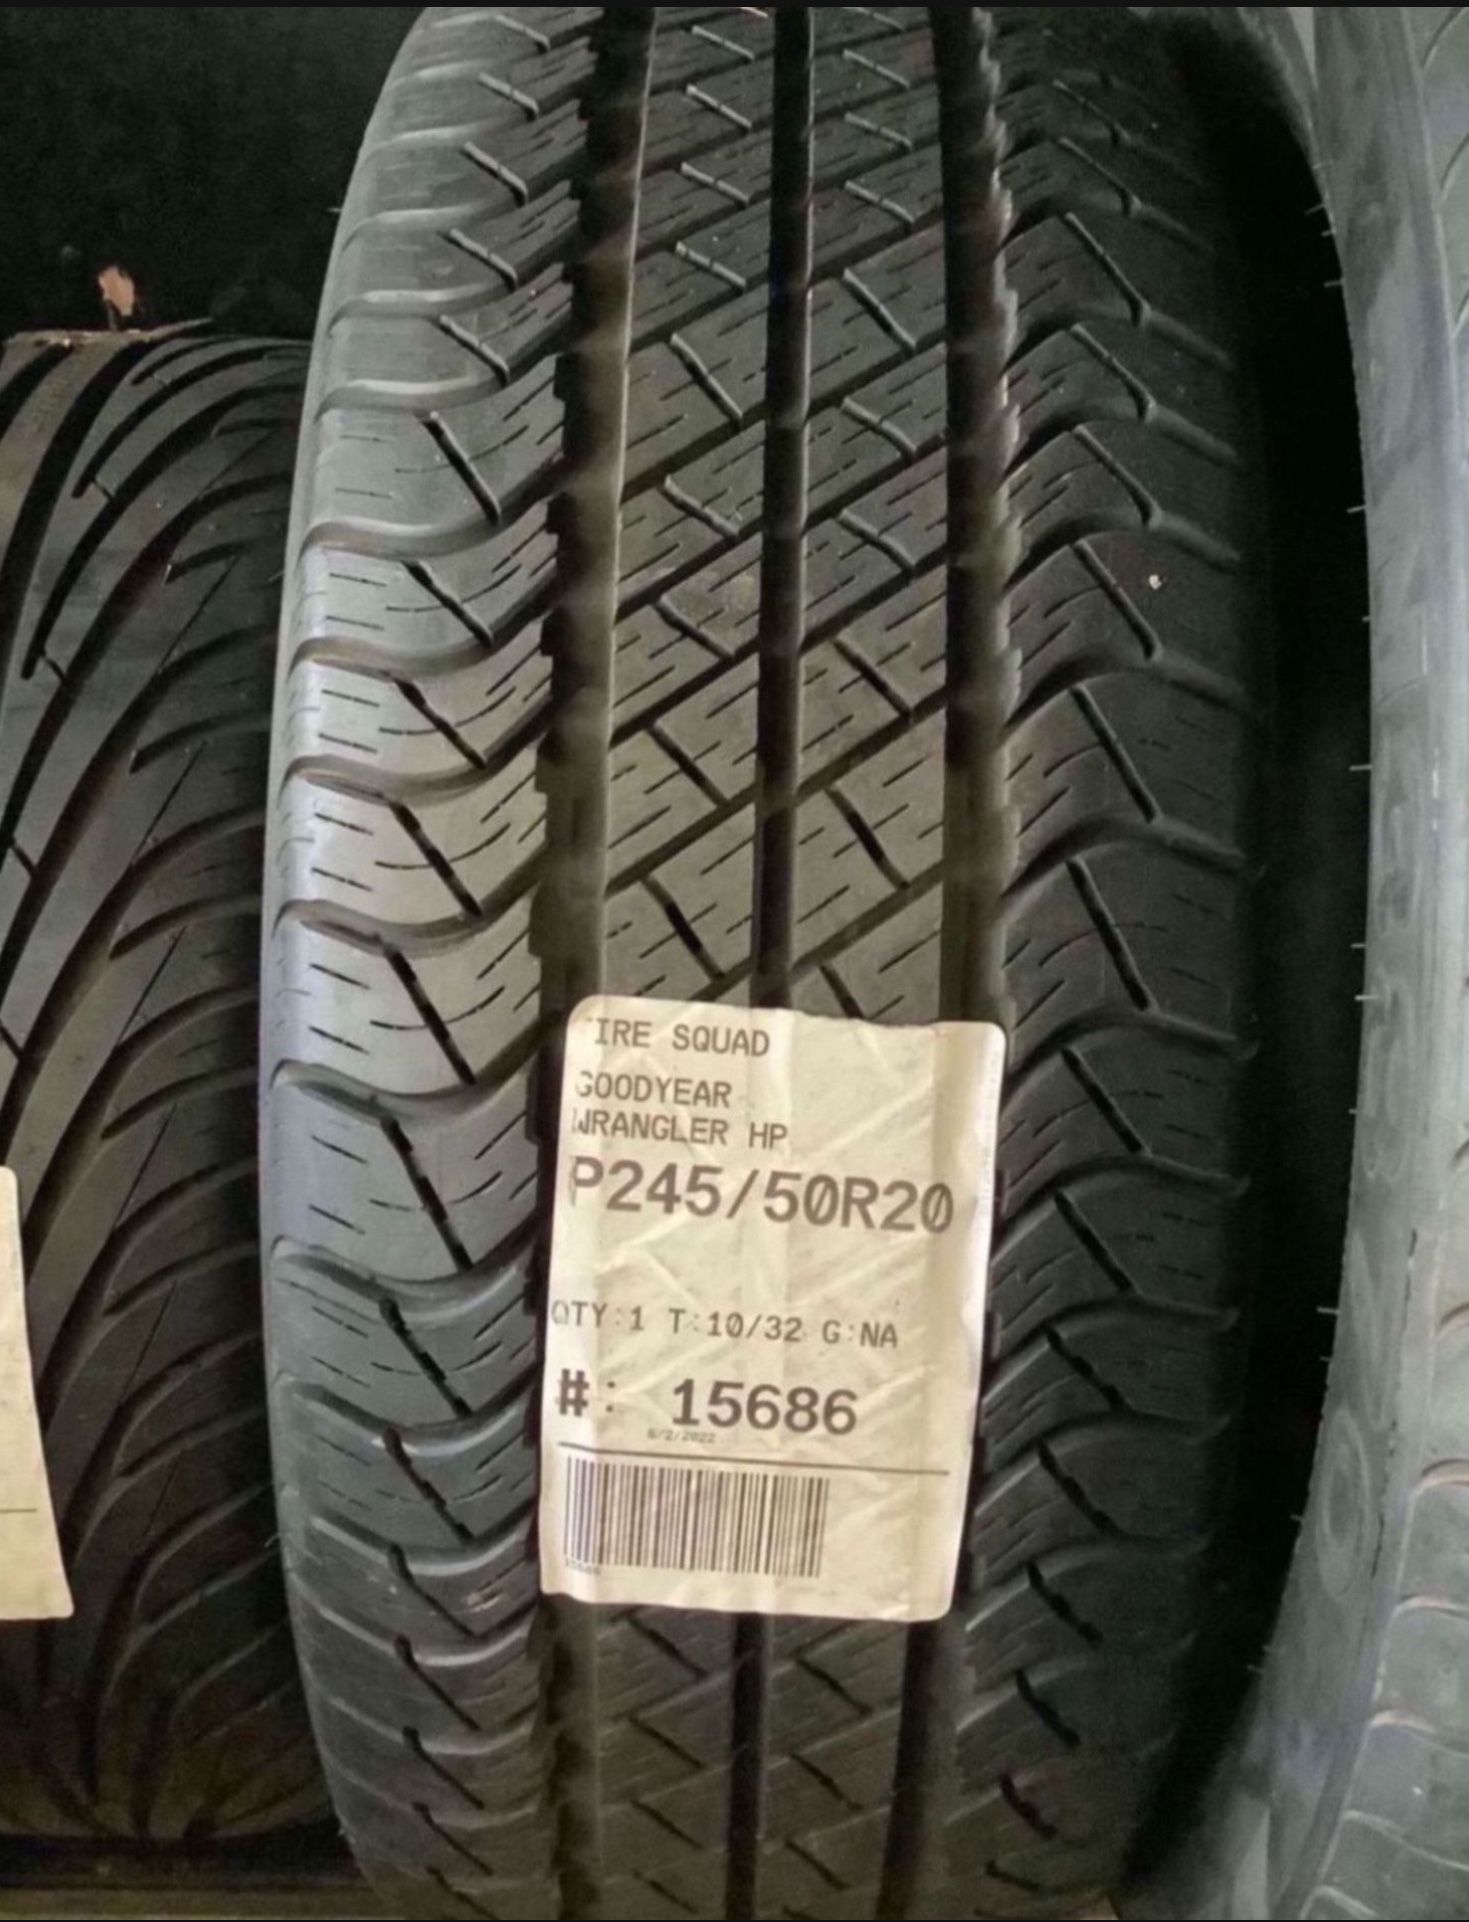 NEW 245 50 20 Goodyear Wrangler HP with 100% Tread 10/32 102S #15686 Best  Grade A Tires Today for Sale in Biscayne Park, FL - OfferUp